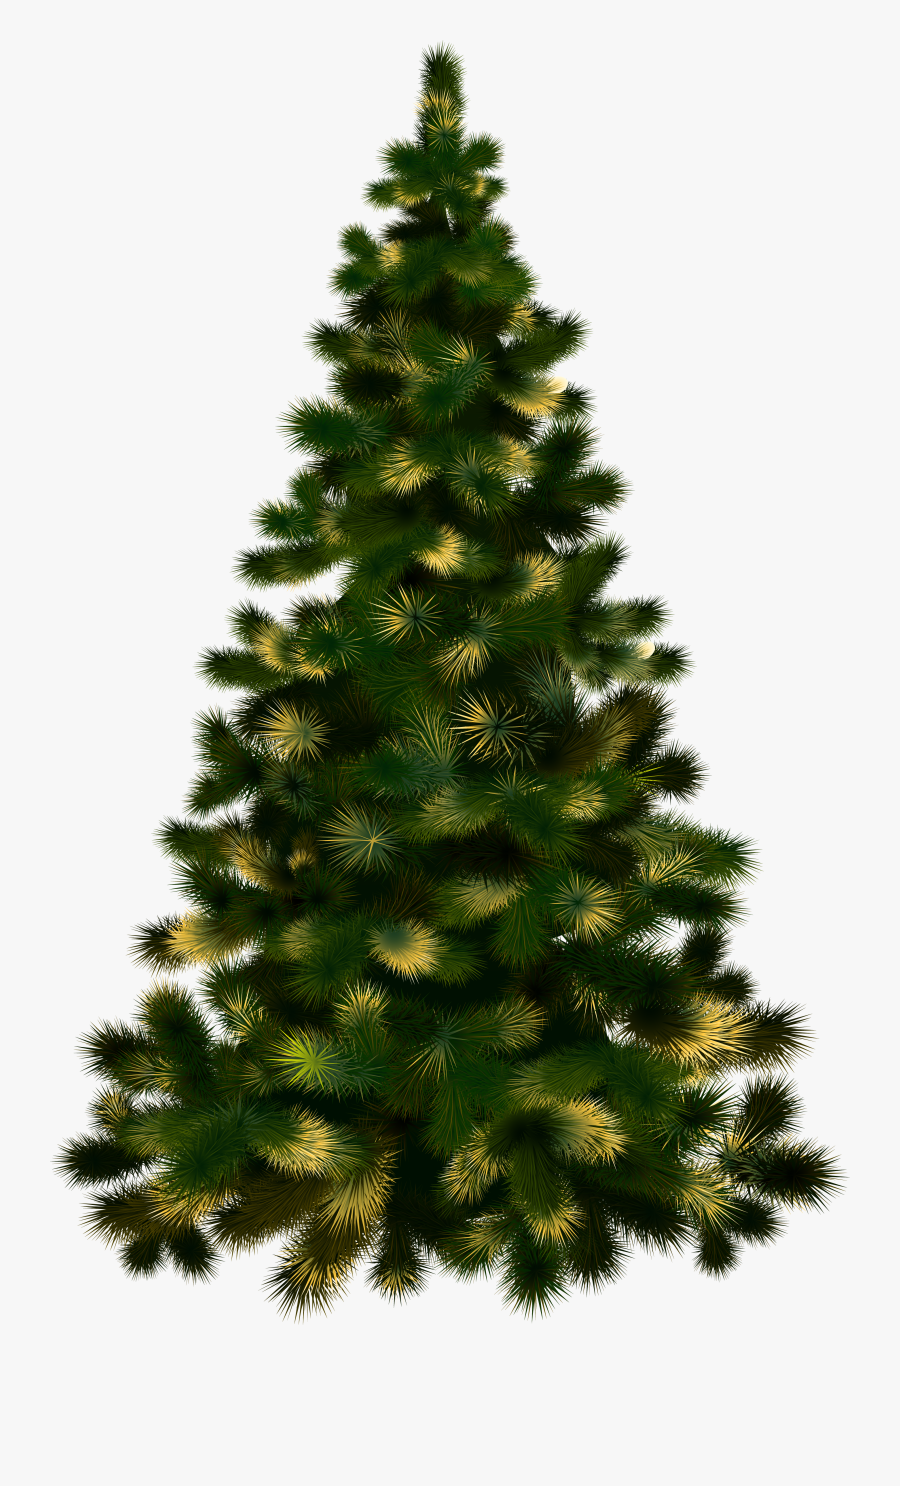 Transparent Christmas Tree With Lights Clipart - Latest Love Songs 2019, Transparent Clipart